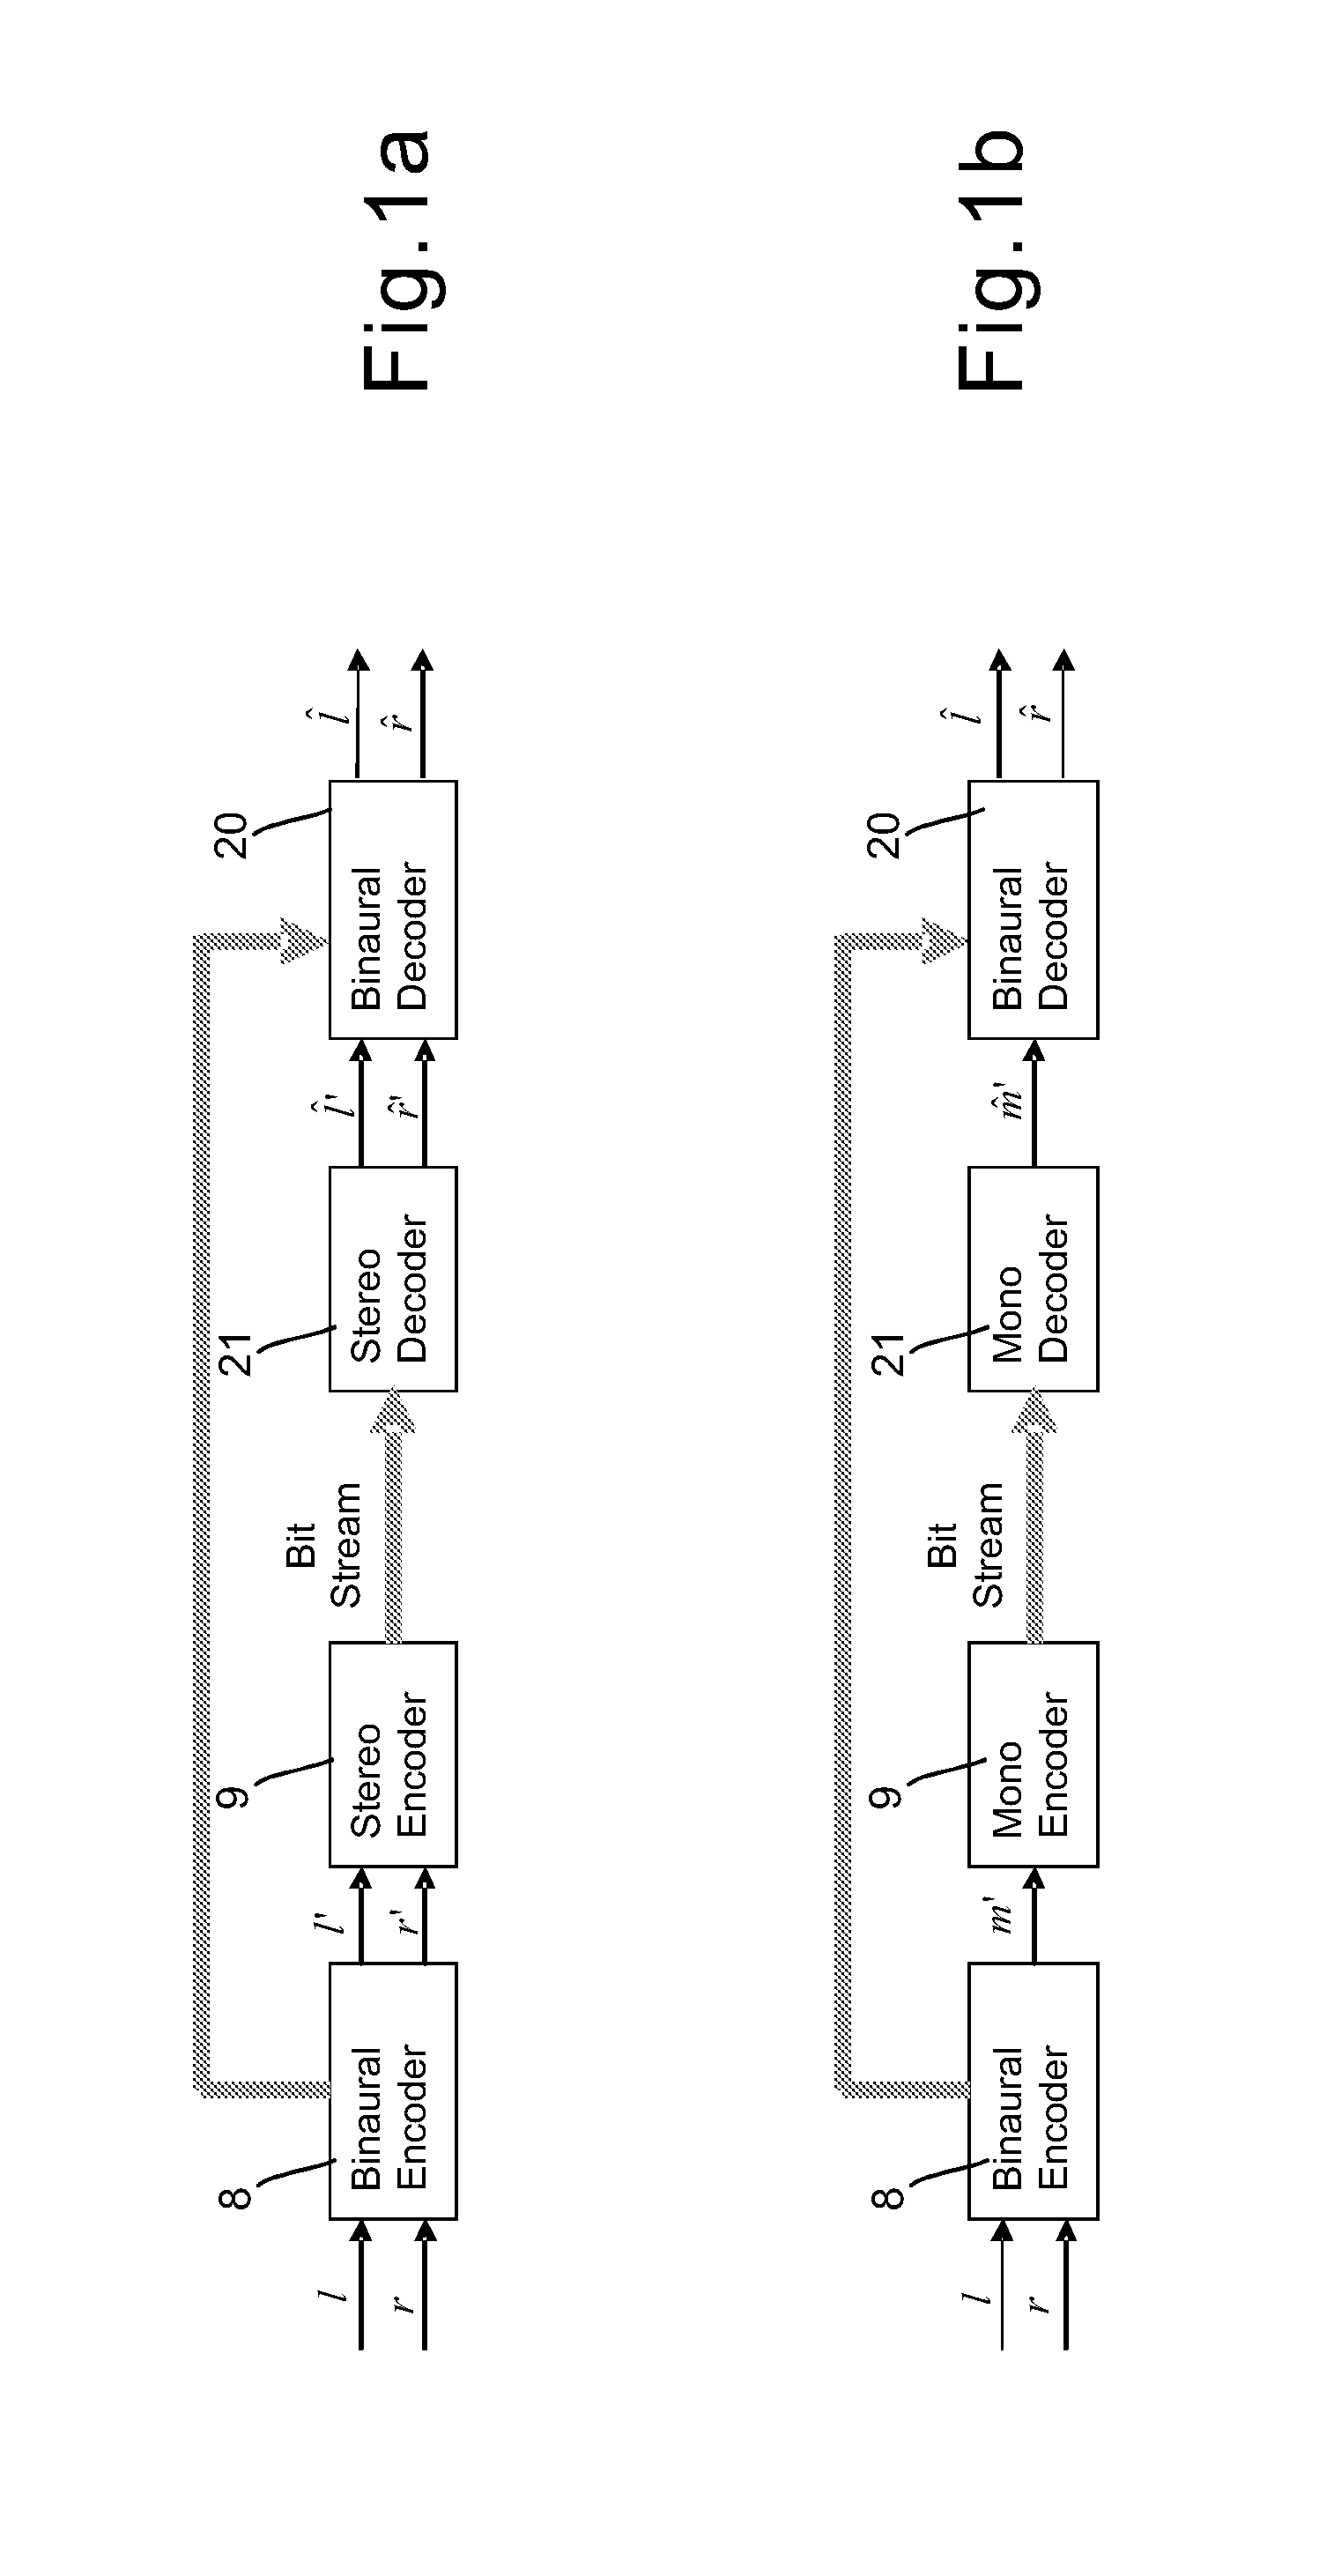 Method, Apparatus and Computer Program Product for Audio Coding